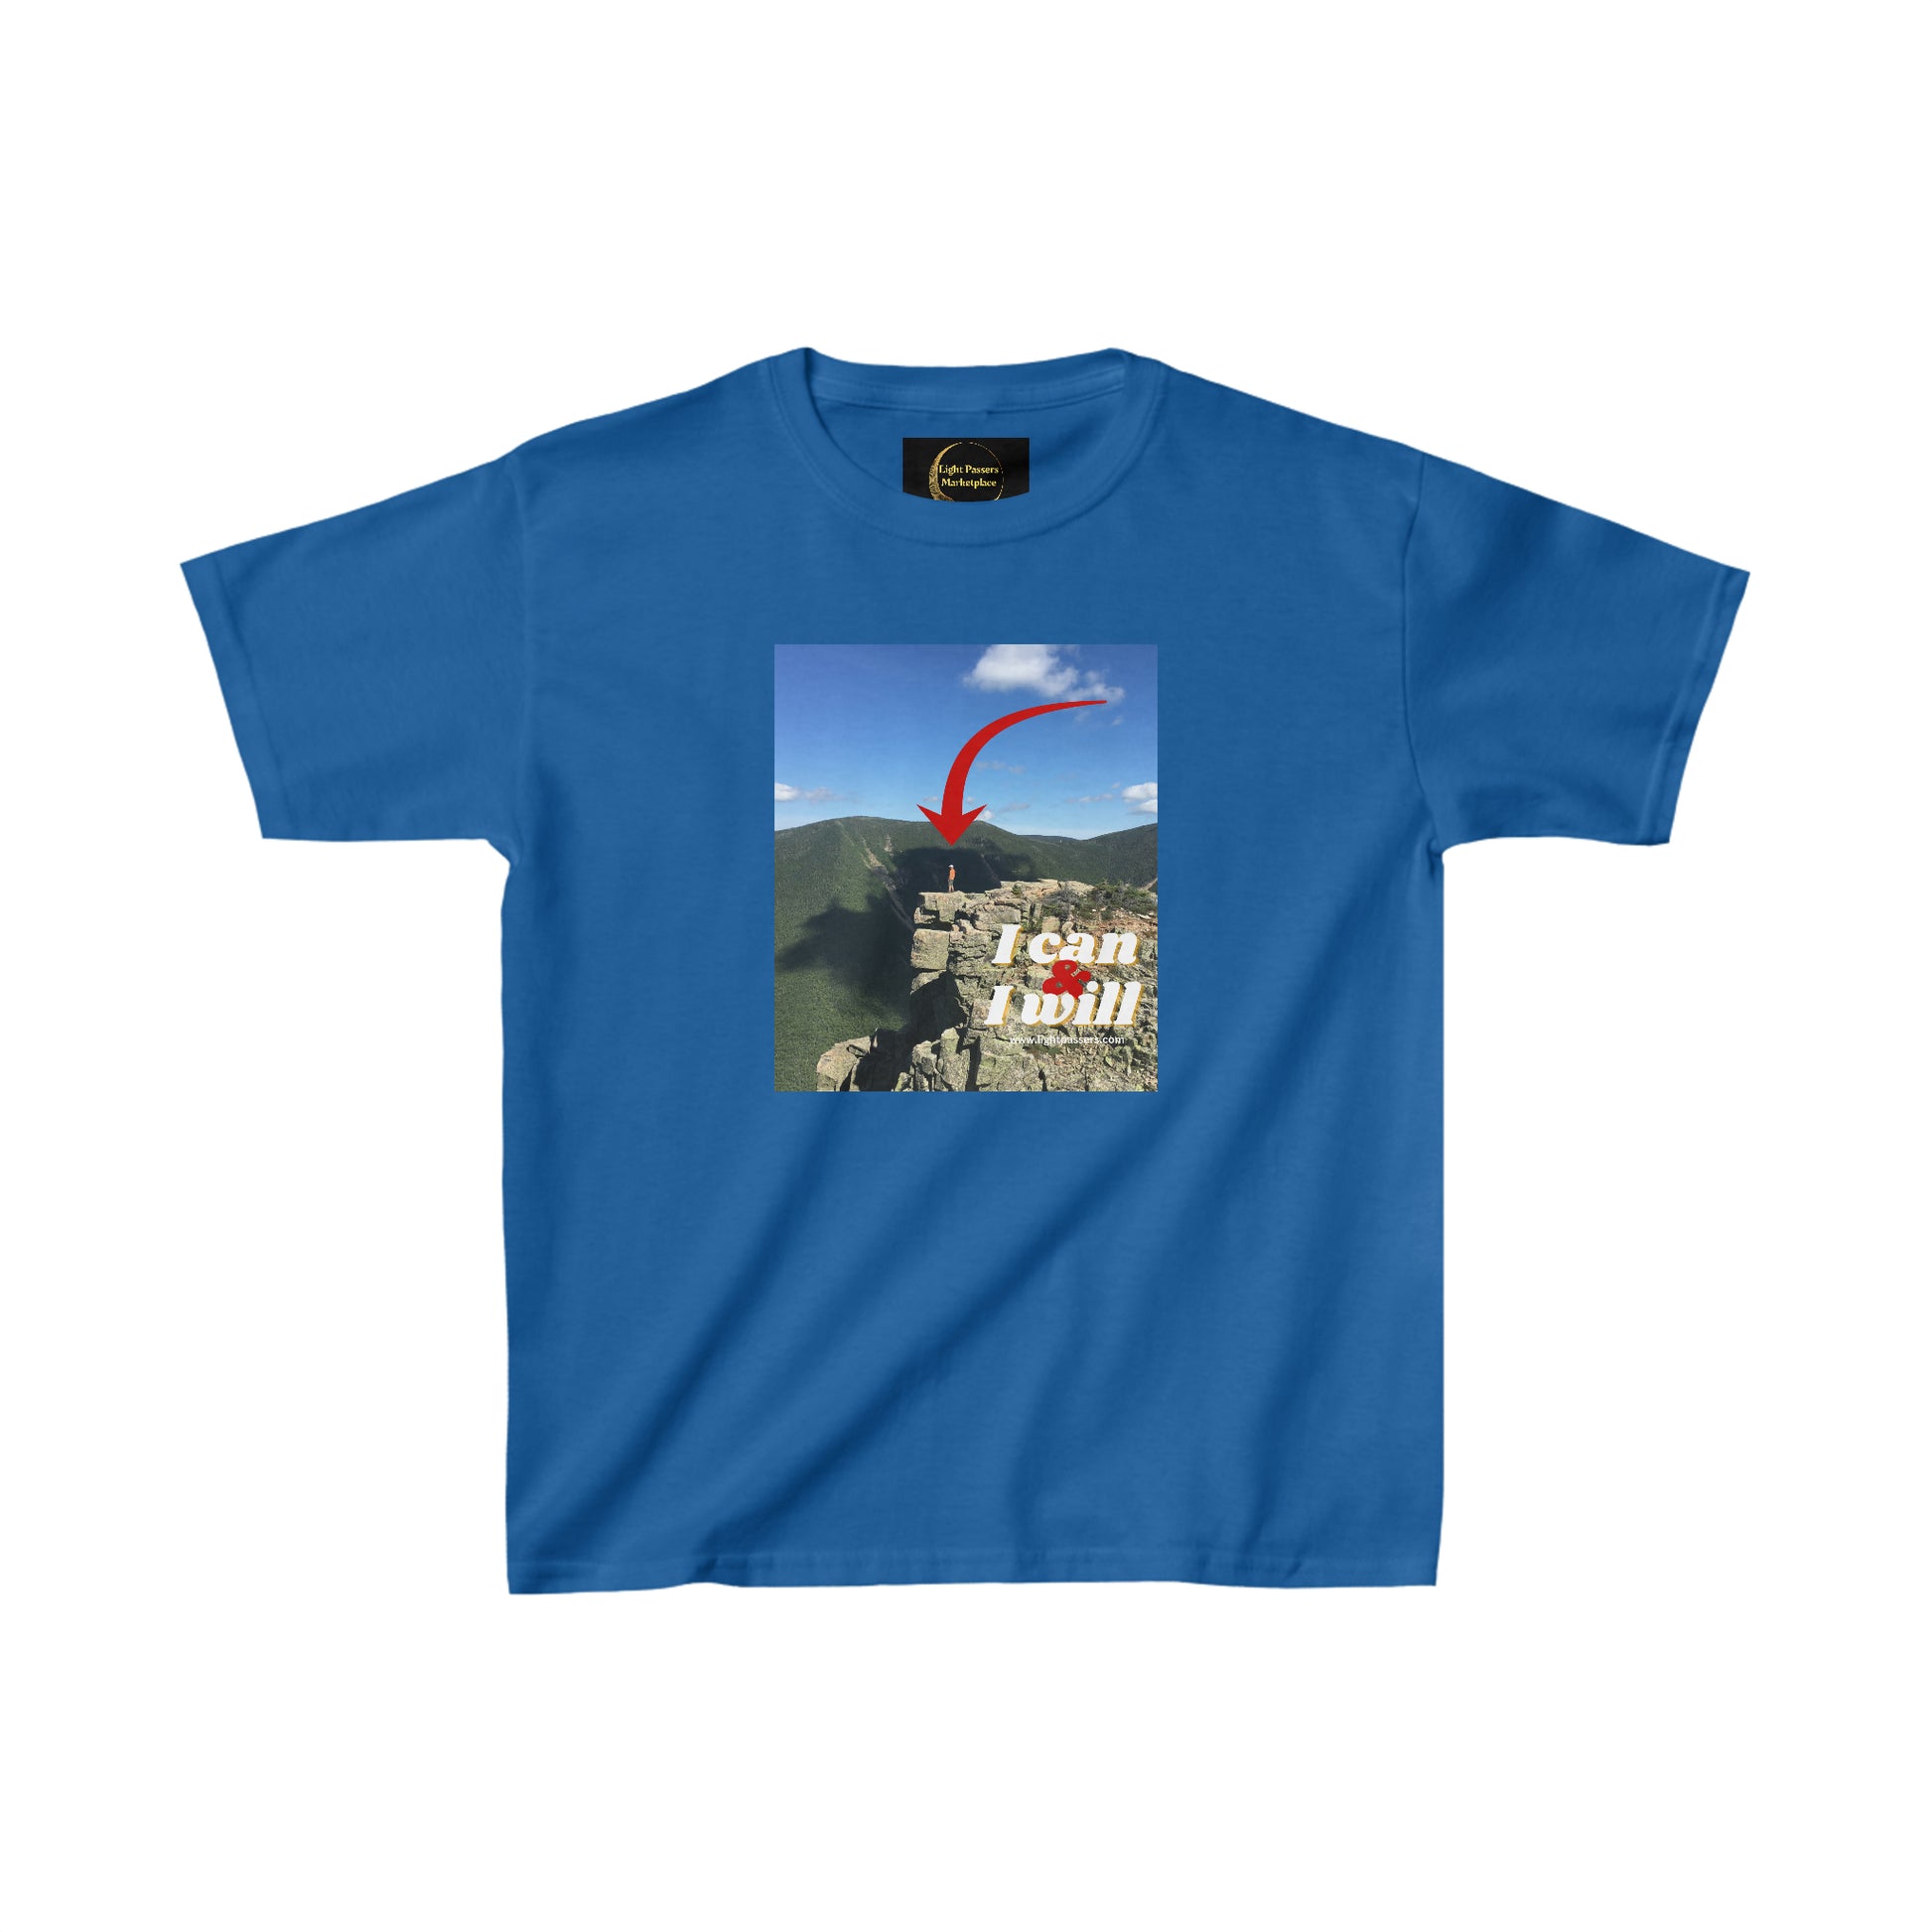 A youth t-shirt featuring a mountain and red arrow design, ideal for everyday wear. Made of 100% cotton, with twill tape shoulders for durability and a curl-resistant collar. Ethically sourced and Oeko-Tex certified.